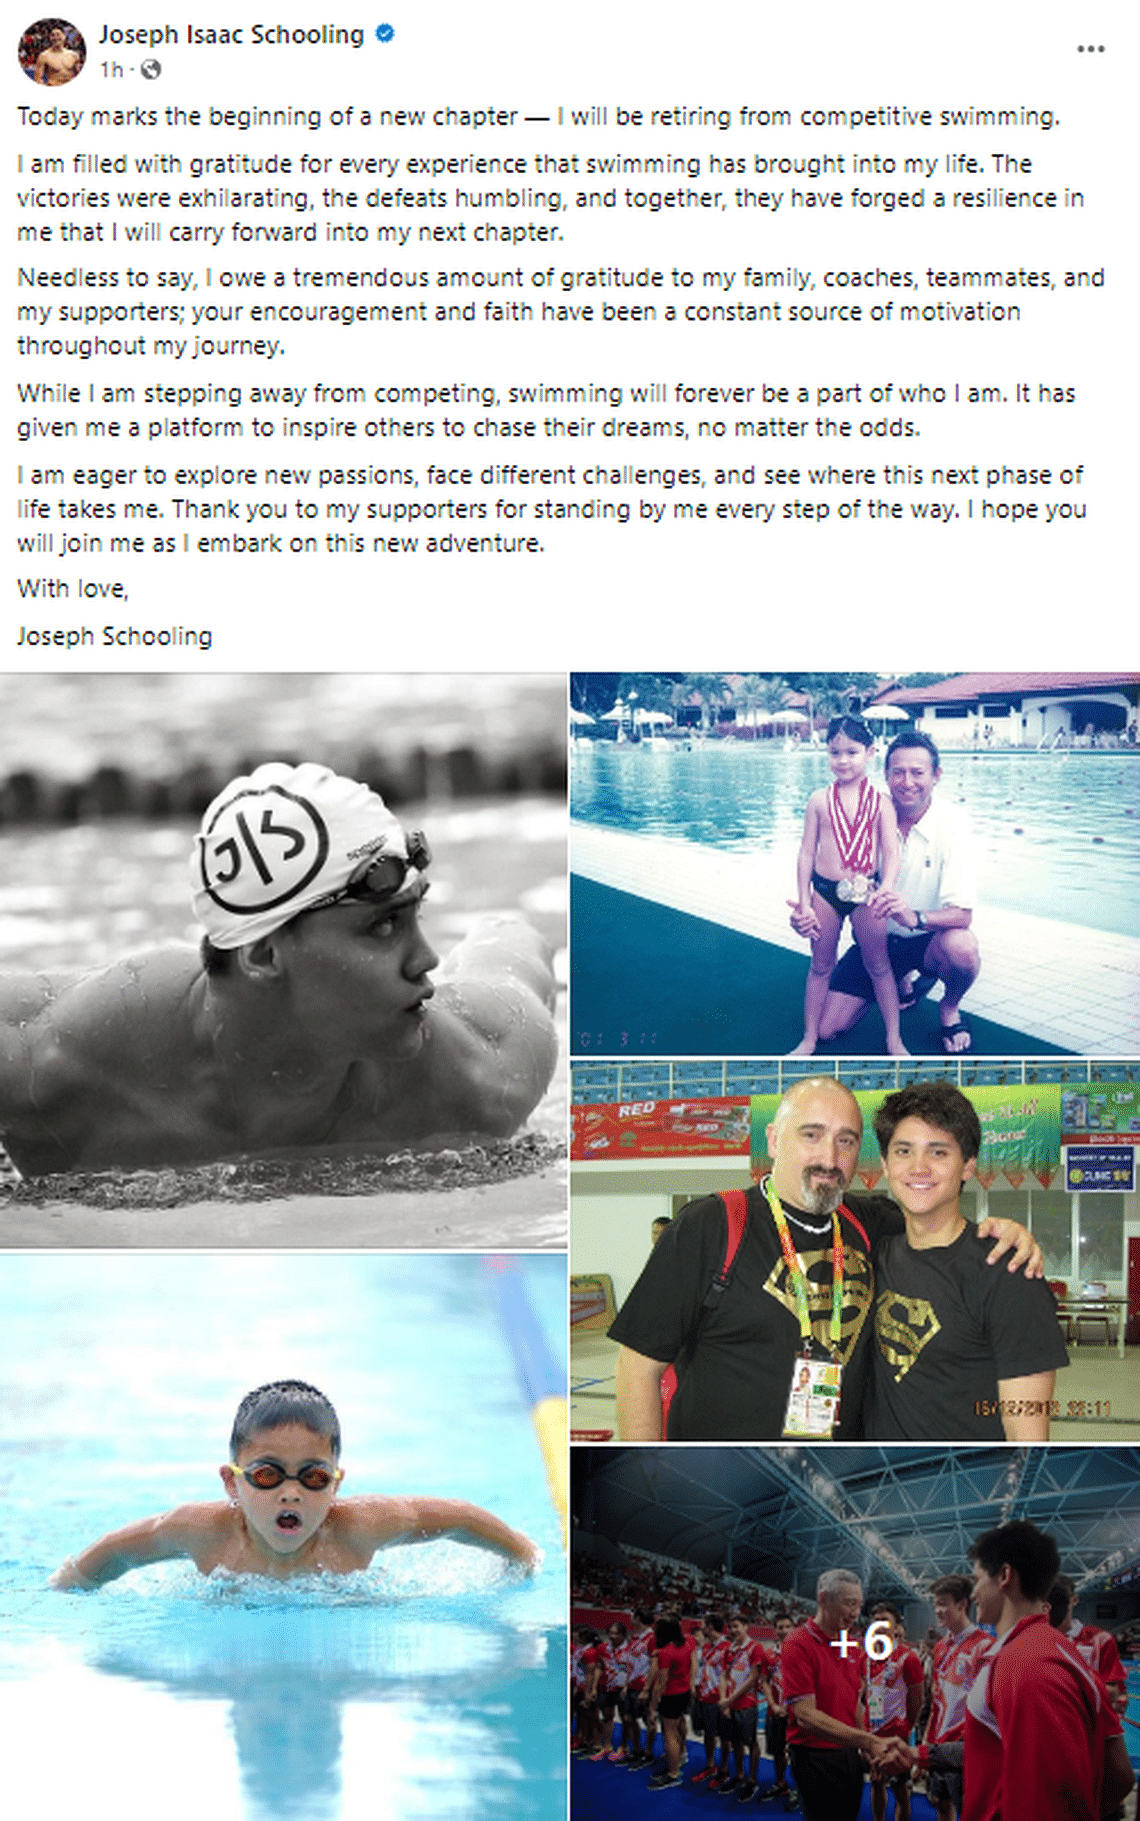 ‘Thank you for flying our flag high’: PM Lee, Edwin Tong pay tribute to Joseph Schooling